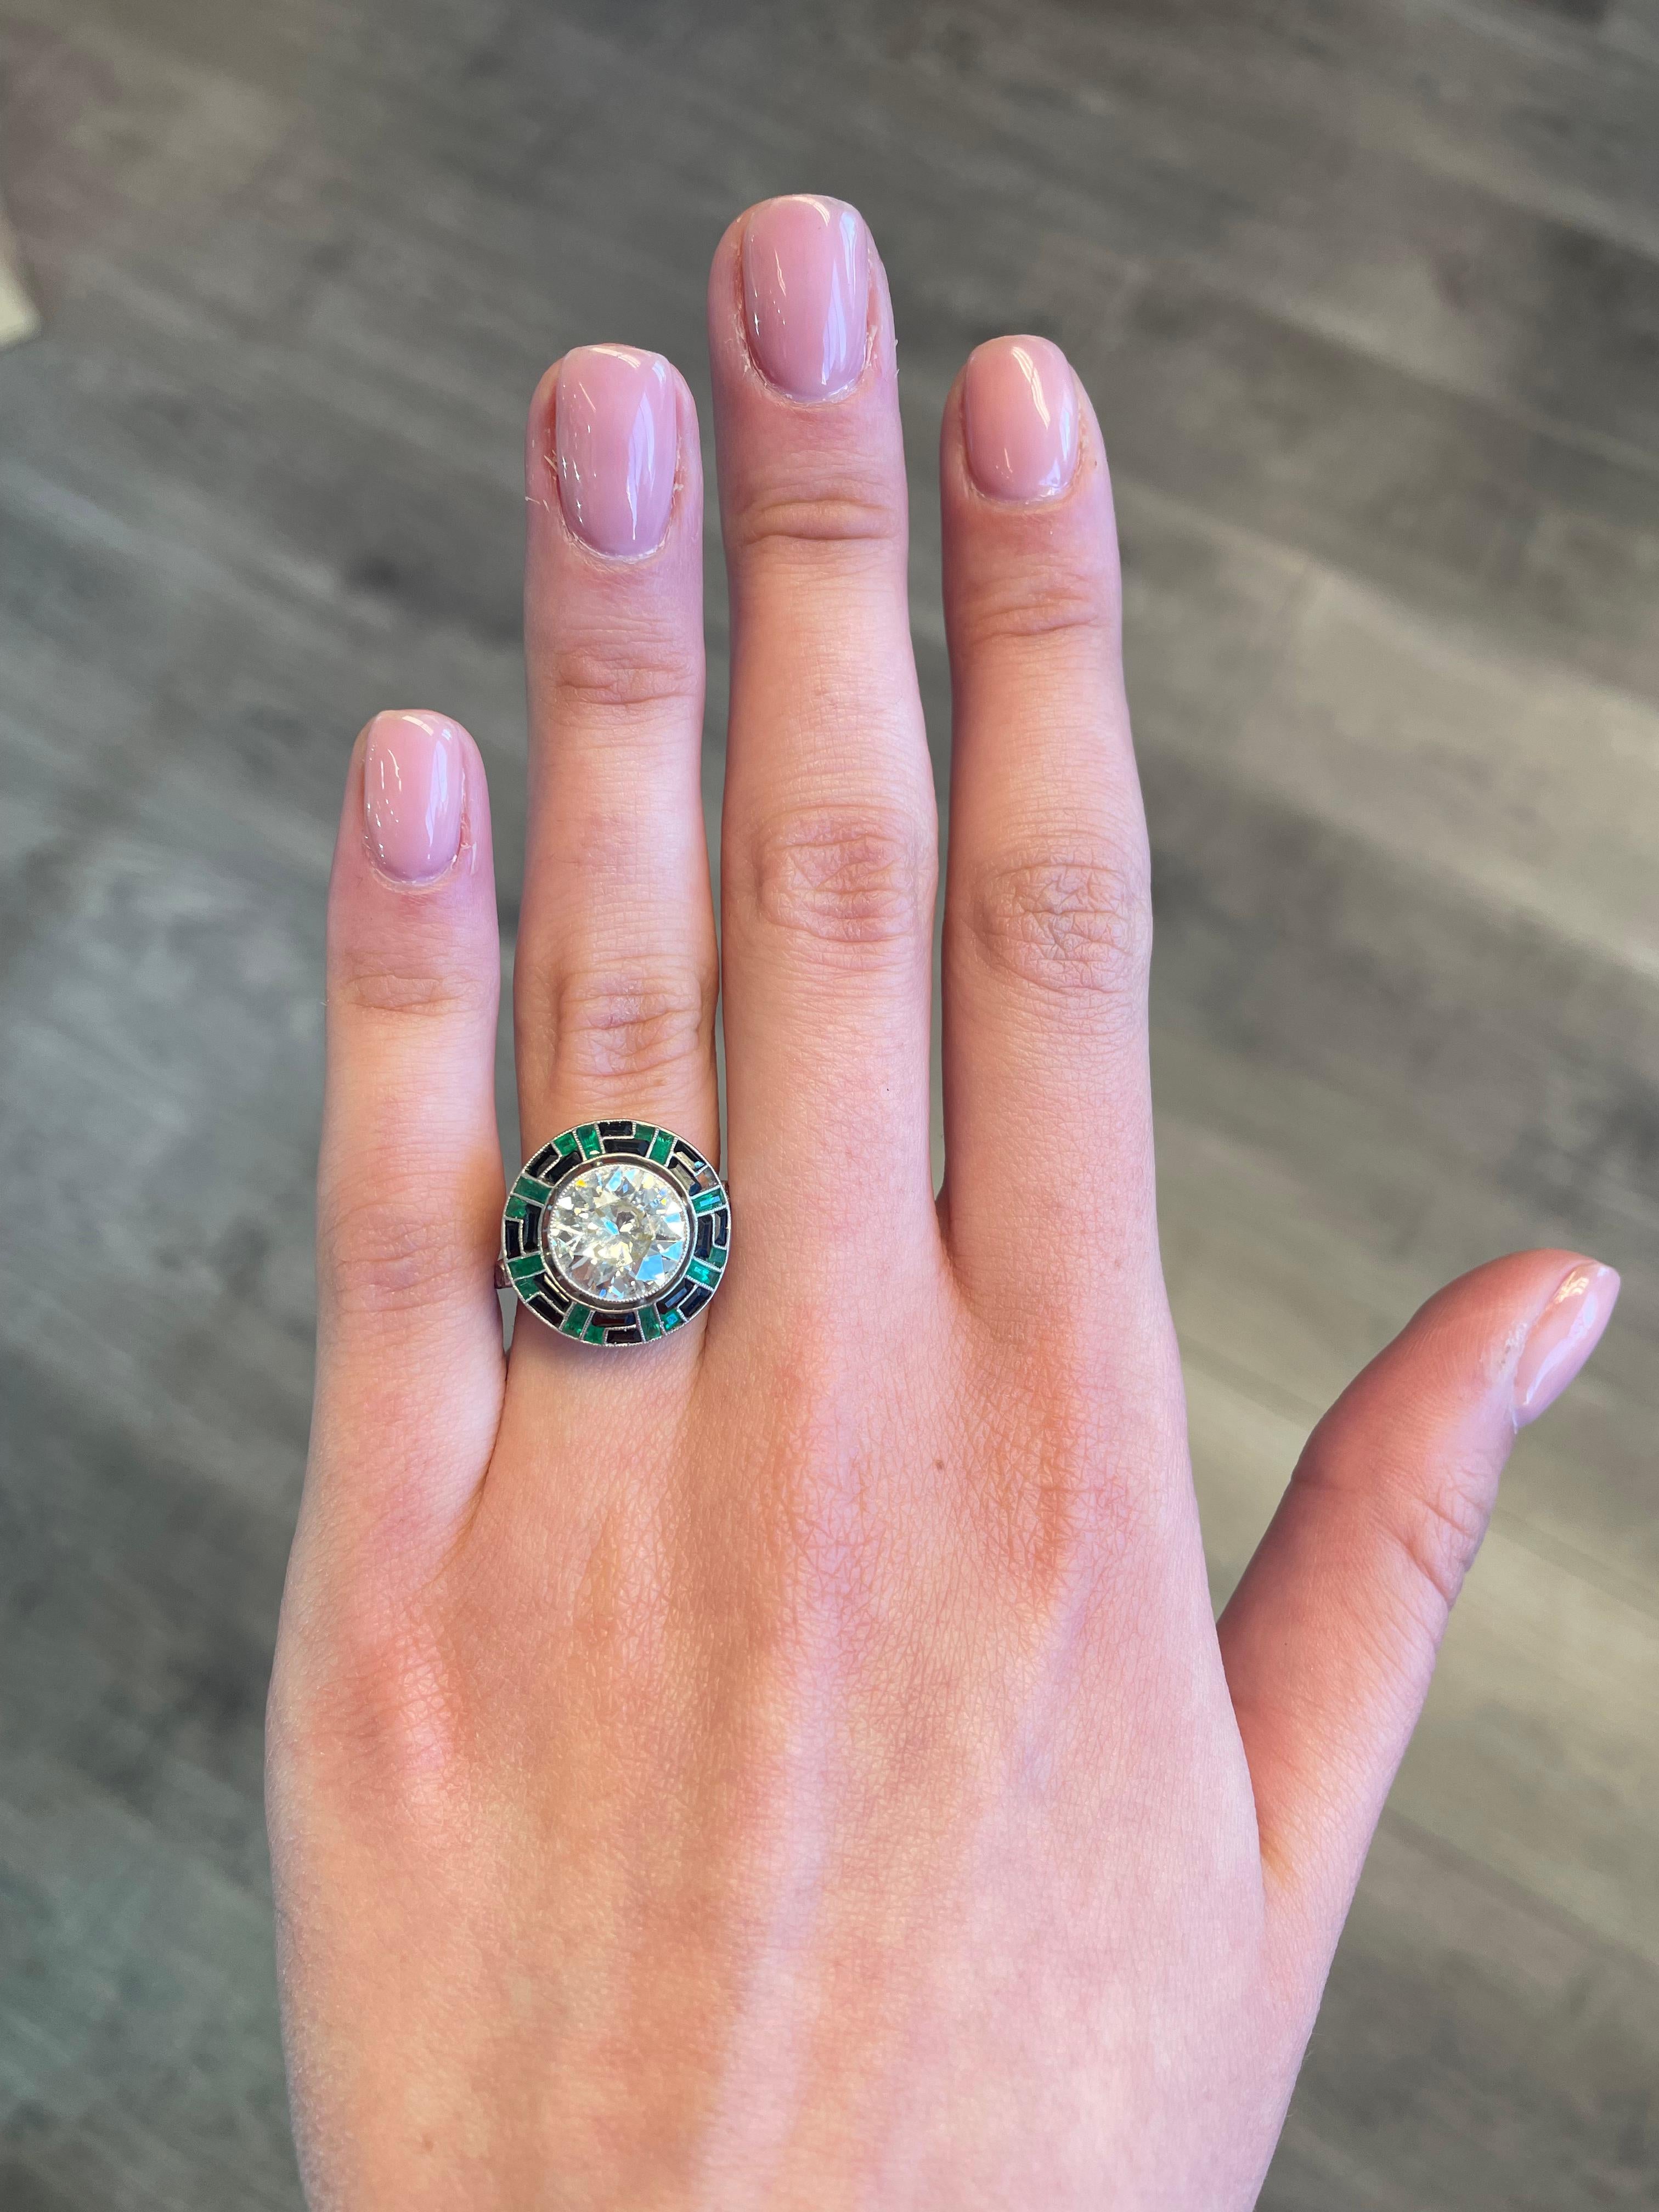 Stunning Art Deco inspired diamond ring with emerald and onyx halo, vintage inspired high jewelry.
Center round diamond 3.32 carats, approximately M/N color and VS2/SI1 clarity. Complimented by custom cut onyx and emeralds apx F2. Platinum, current